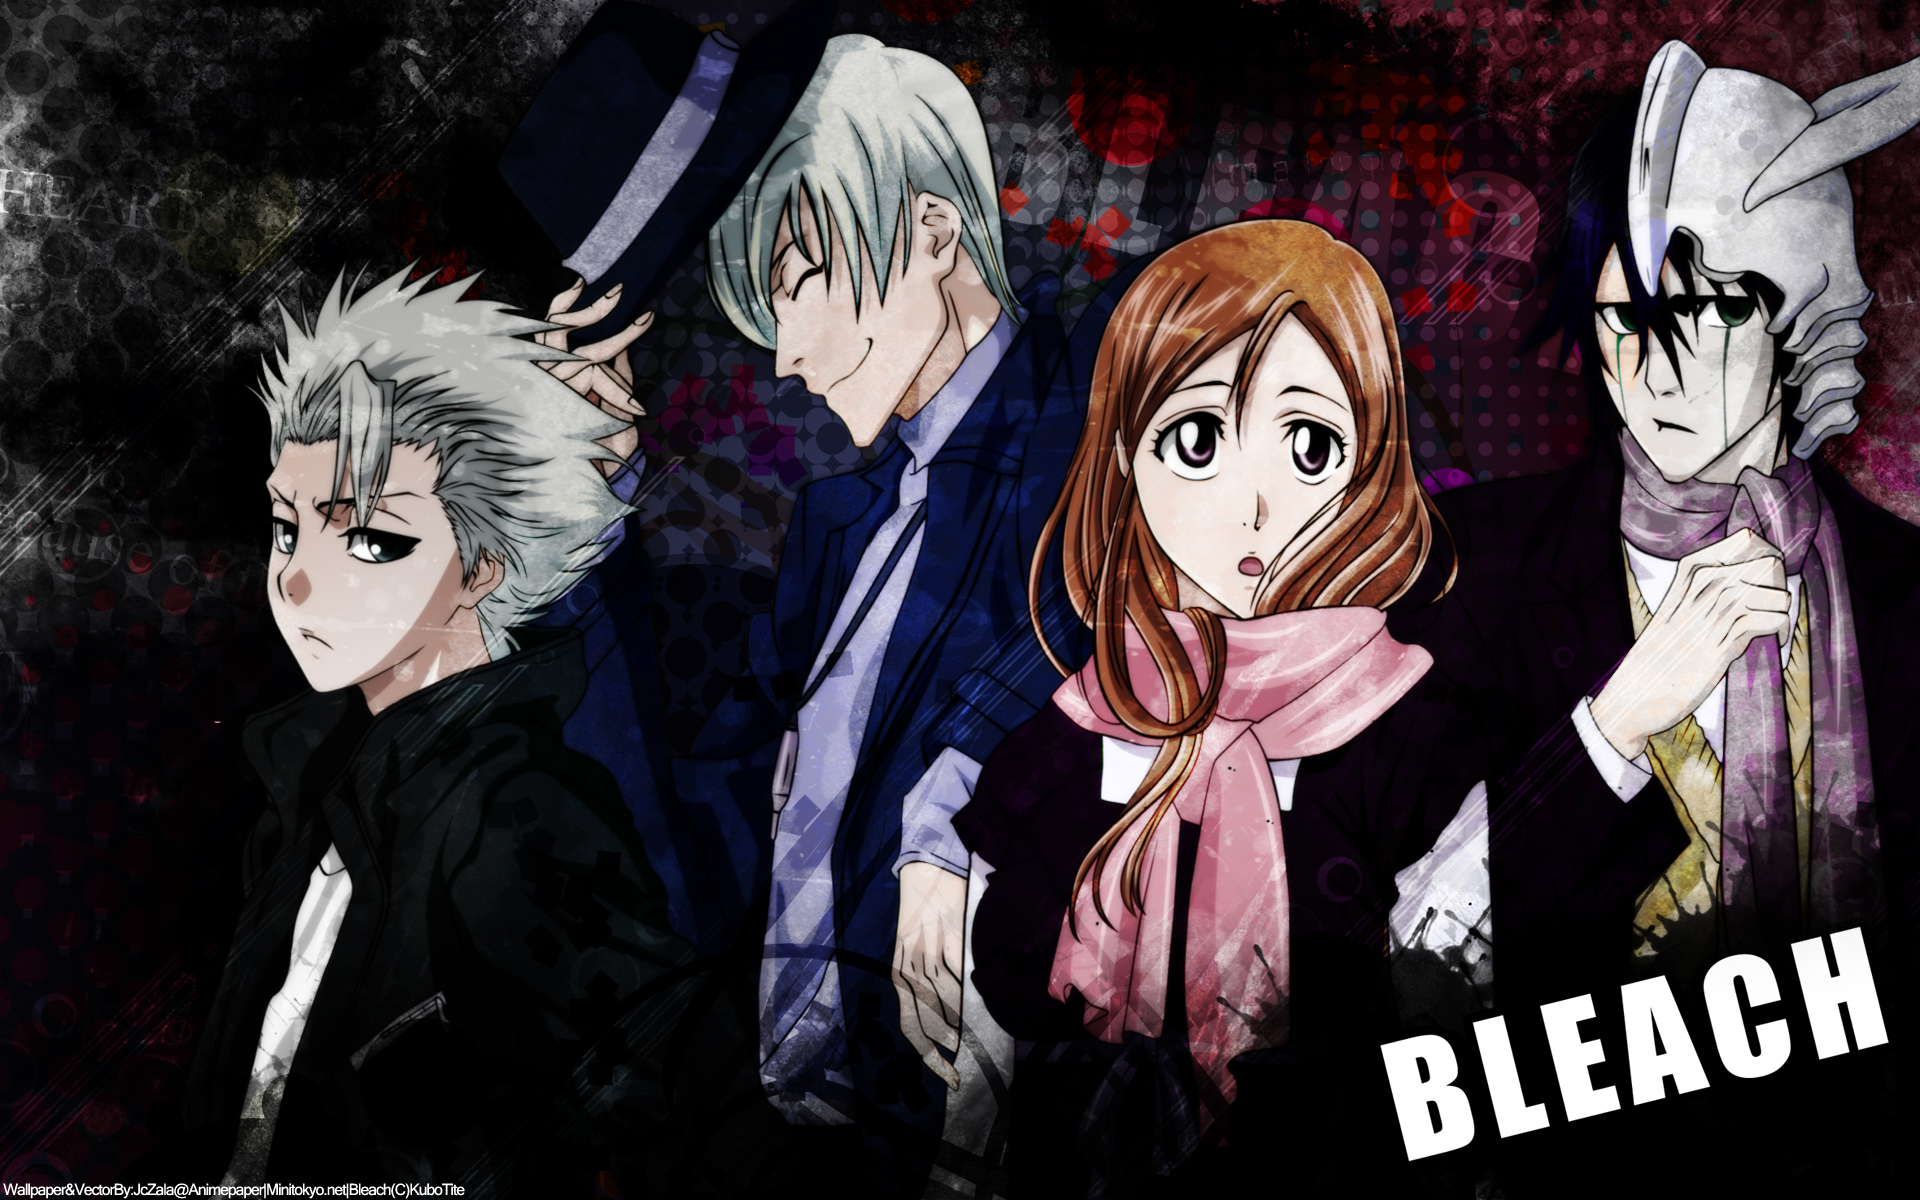 Toshiro Hitsugaya in a black suit - Bleach wallpaper - Anime wallpapers -  #50992